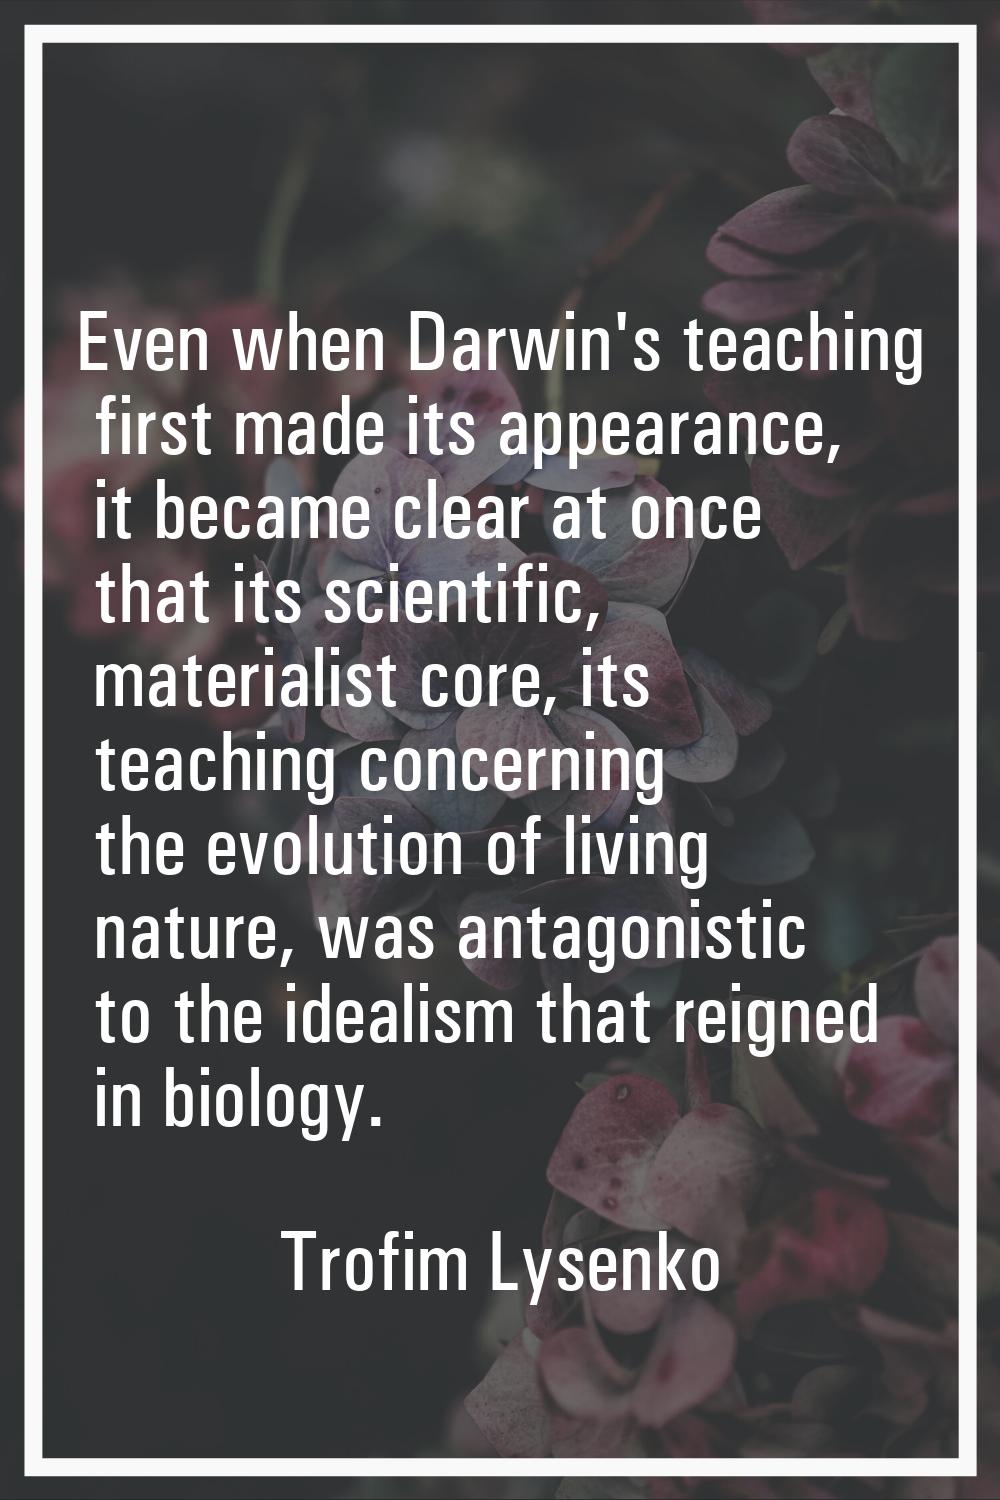 Even when Darwin's teaching first made its appearance, it became clear at once that its scientific,